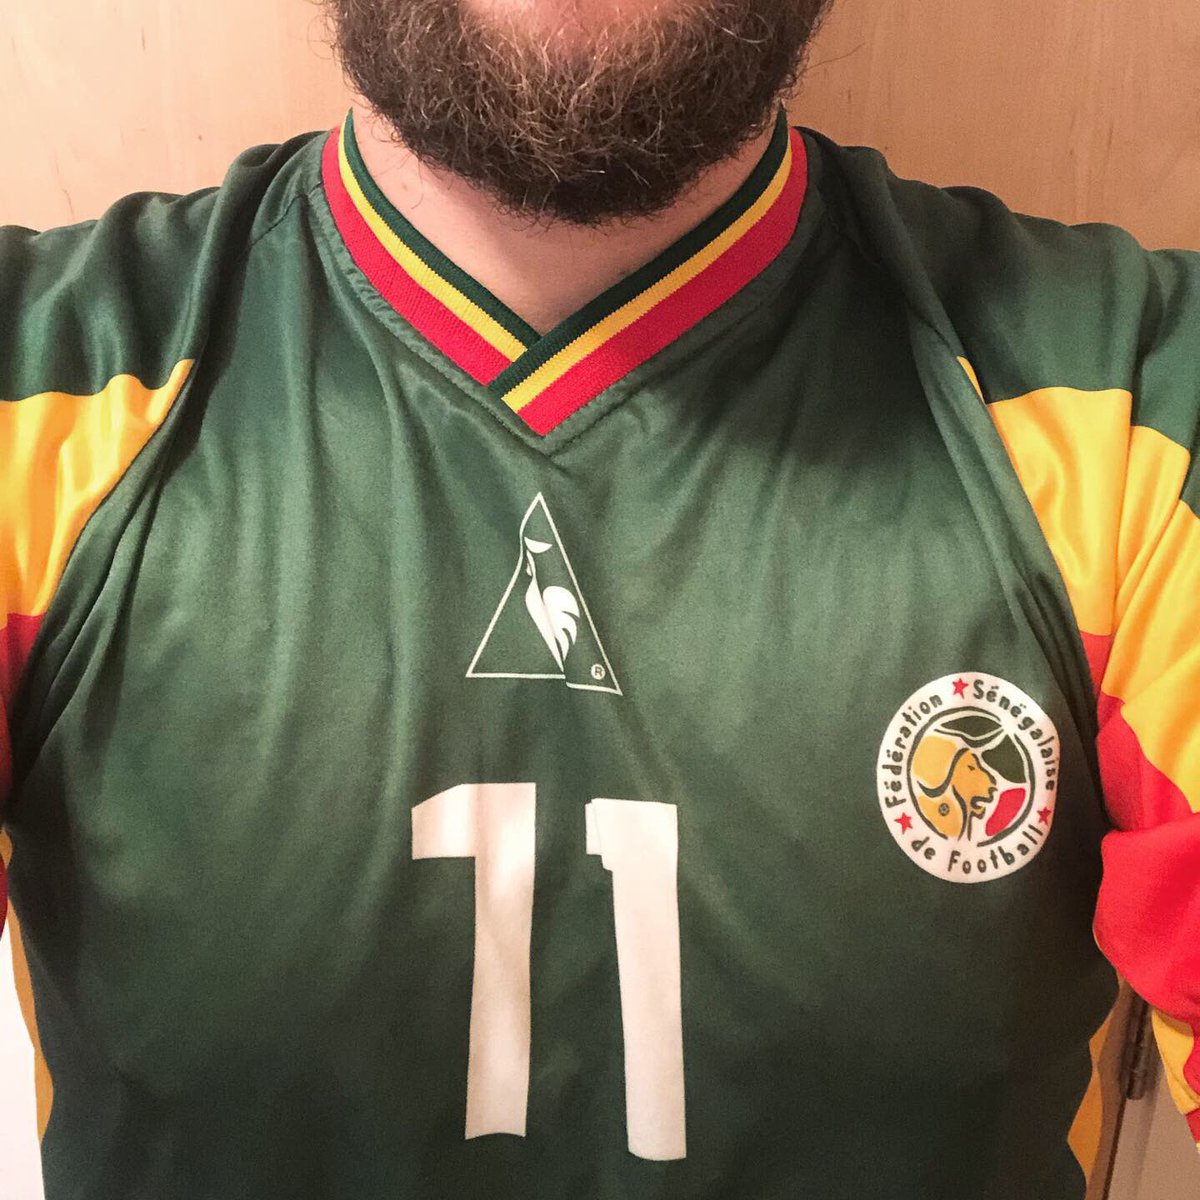  @FootballSenegal Away kit, 2002 World CupI’m not sure they deserved to win, but  #Senegal were definitely the most exciting side last night.Here’s a recent charity shop find, an unofficial replica from Senegal’s legendary 2002 WC squad who defeated France in the opening game